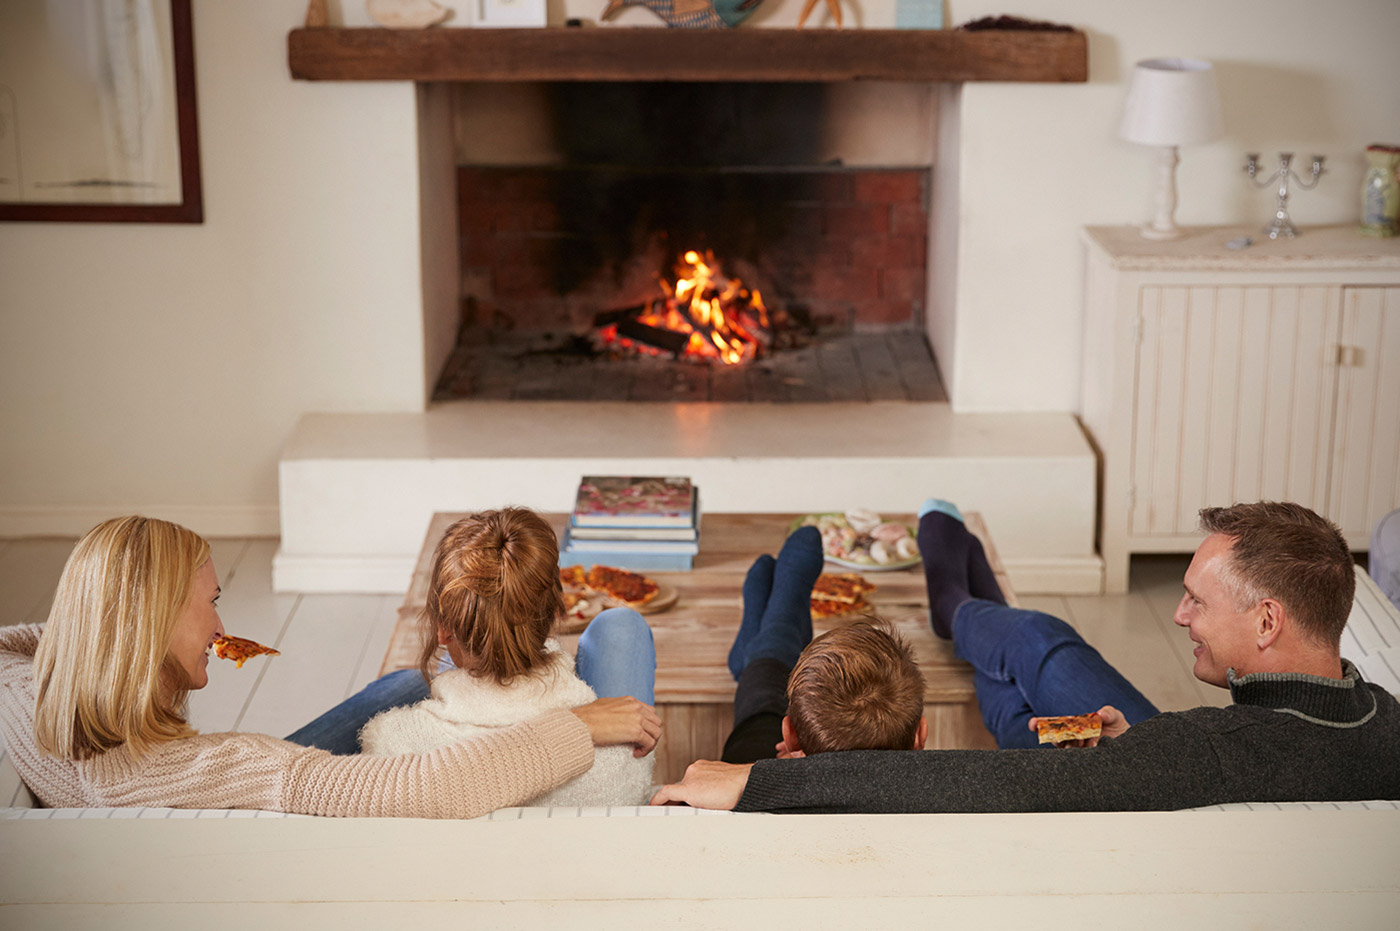 A family sitting together on the couch in front of a lit fireplace.